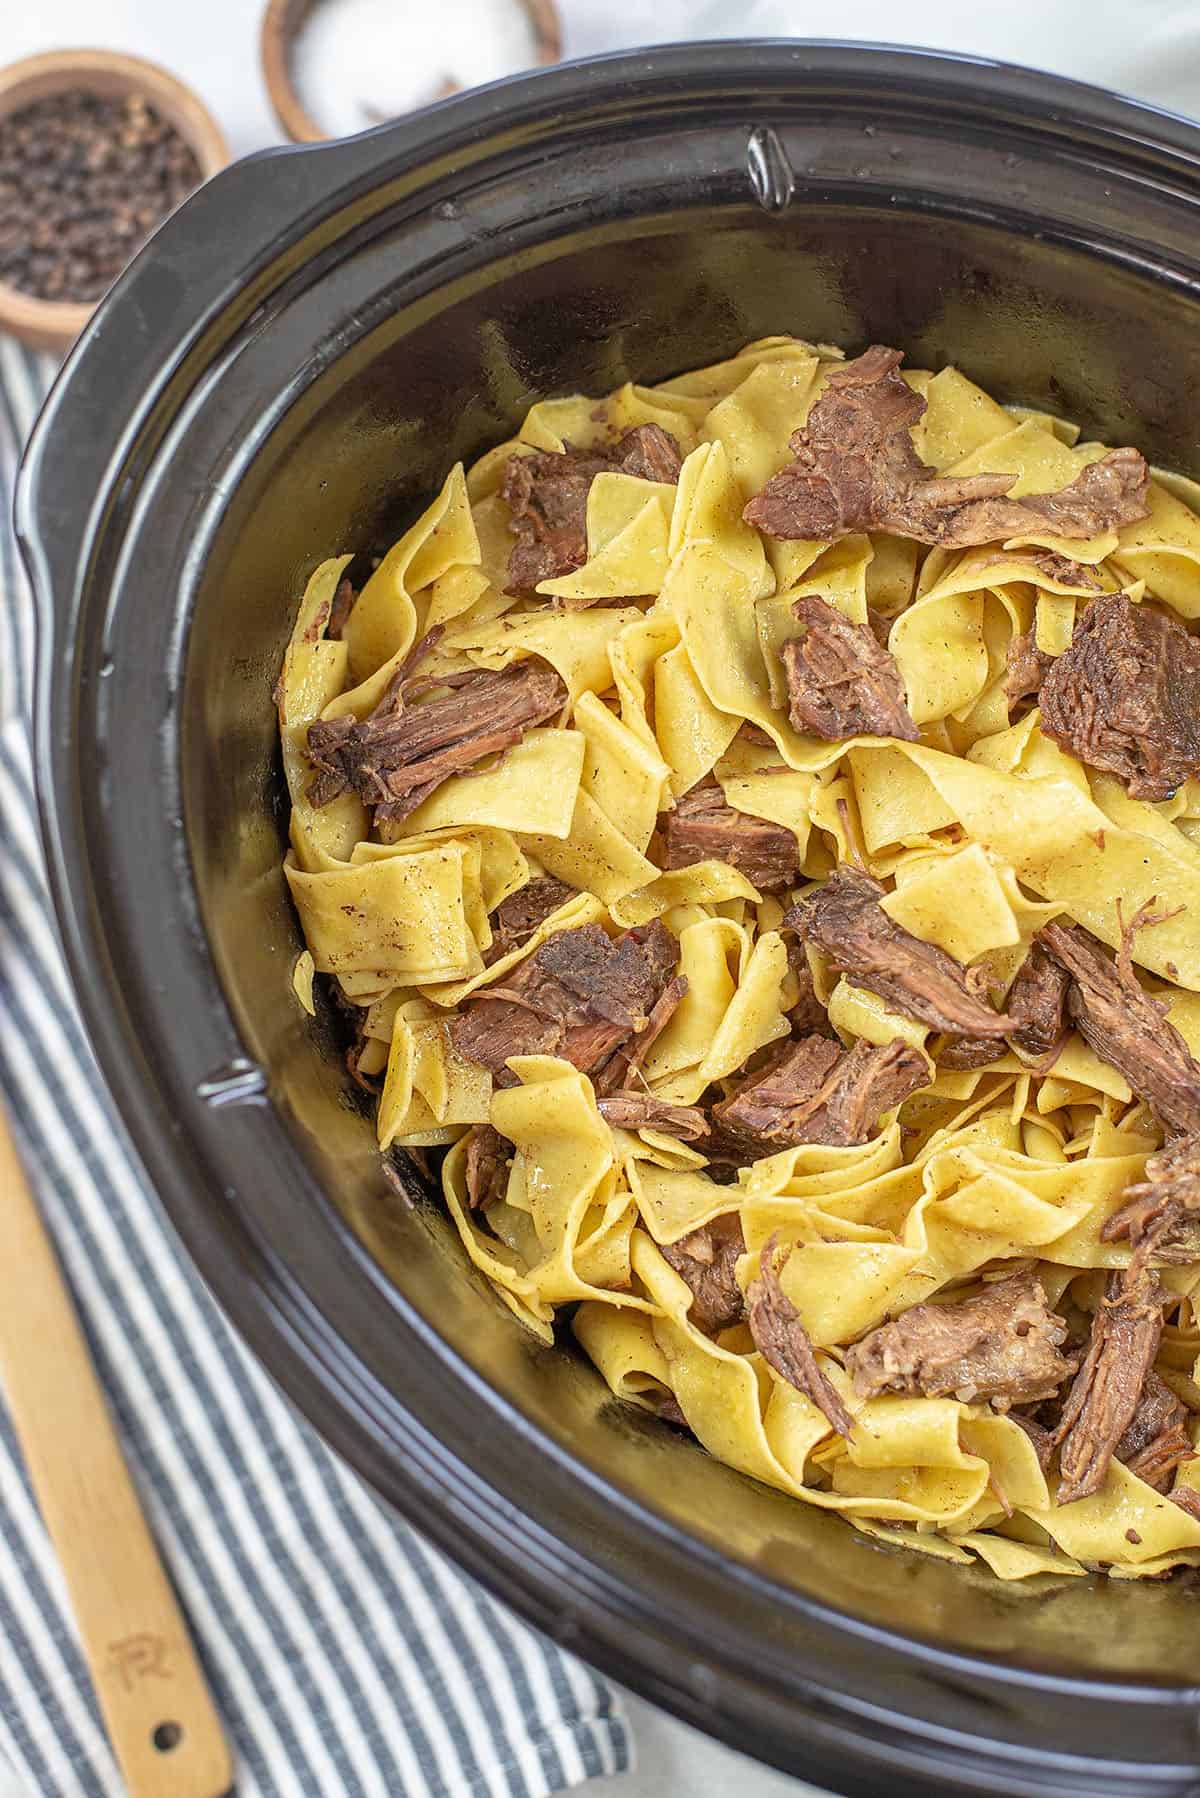 60 Best 3 Ingredient or Less Crock Pot Recipes: Beef, Chicken, and More!